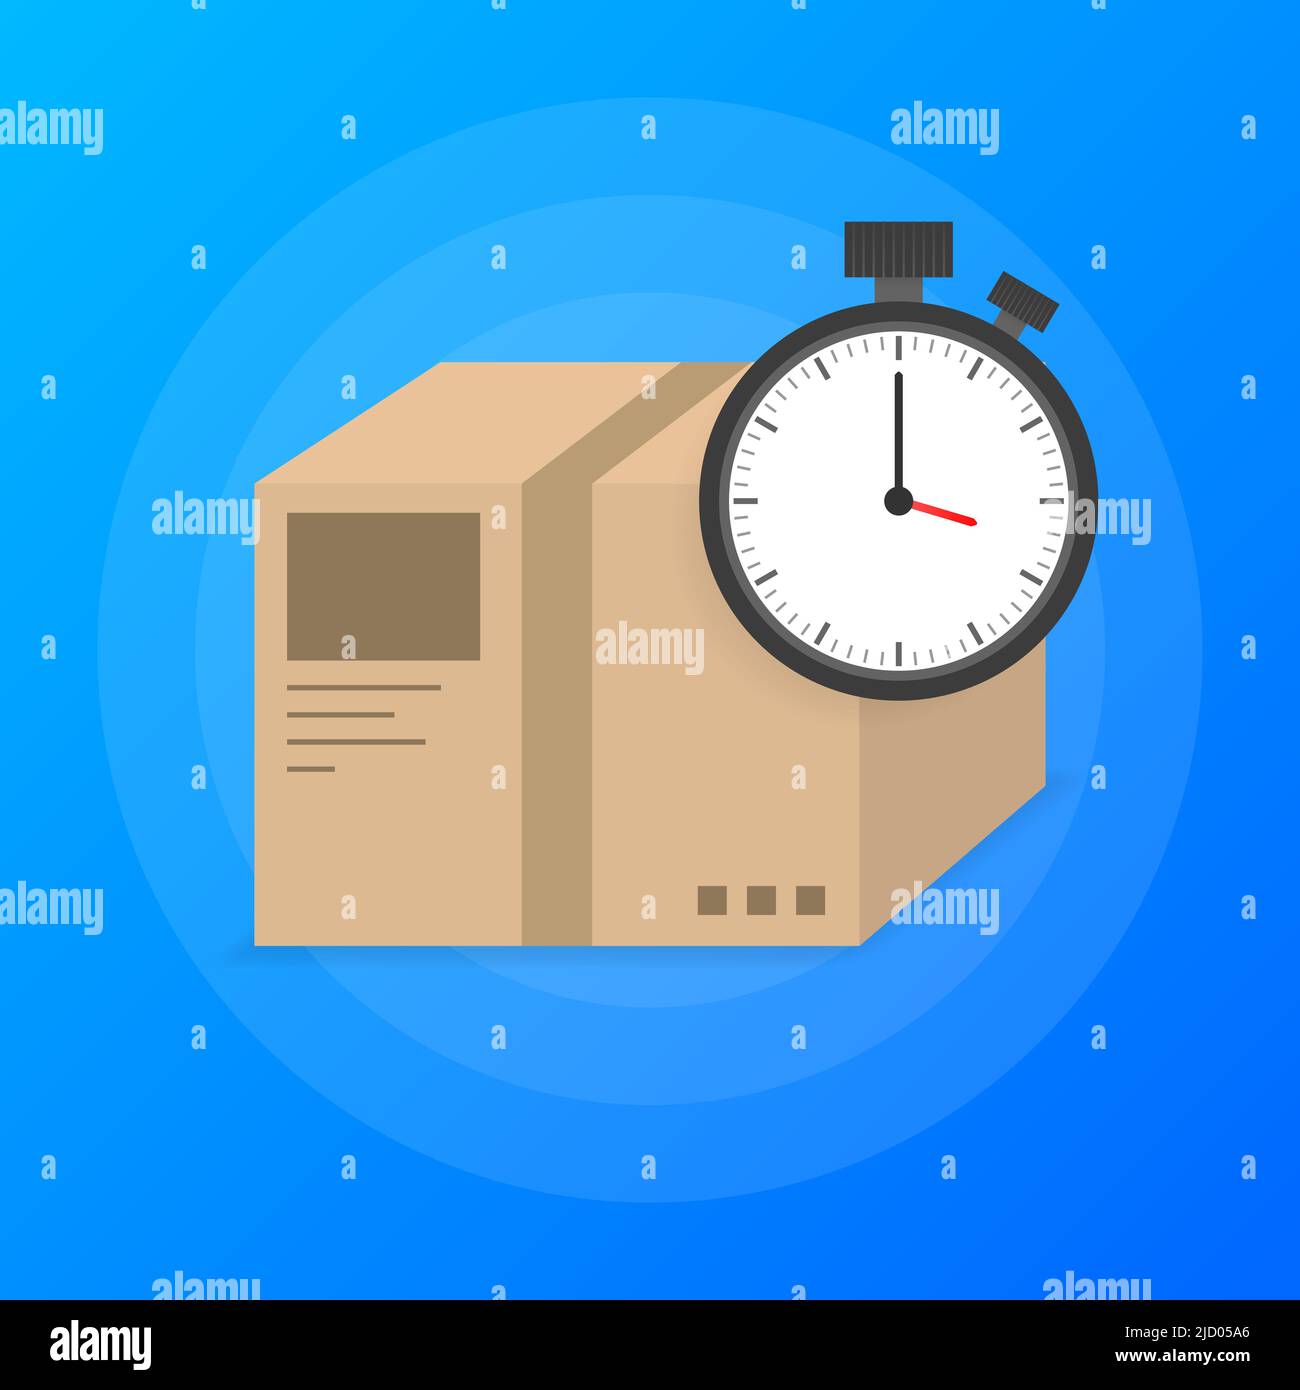 Express delivery service logo. Fast time delivery parcel with stopwatch on blue background. Vector illustration. Stock Vector